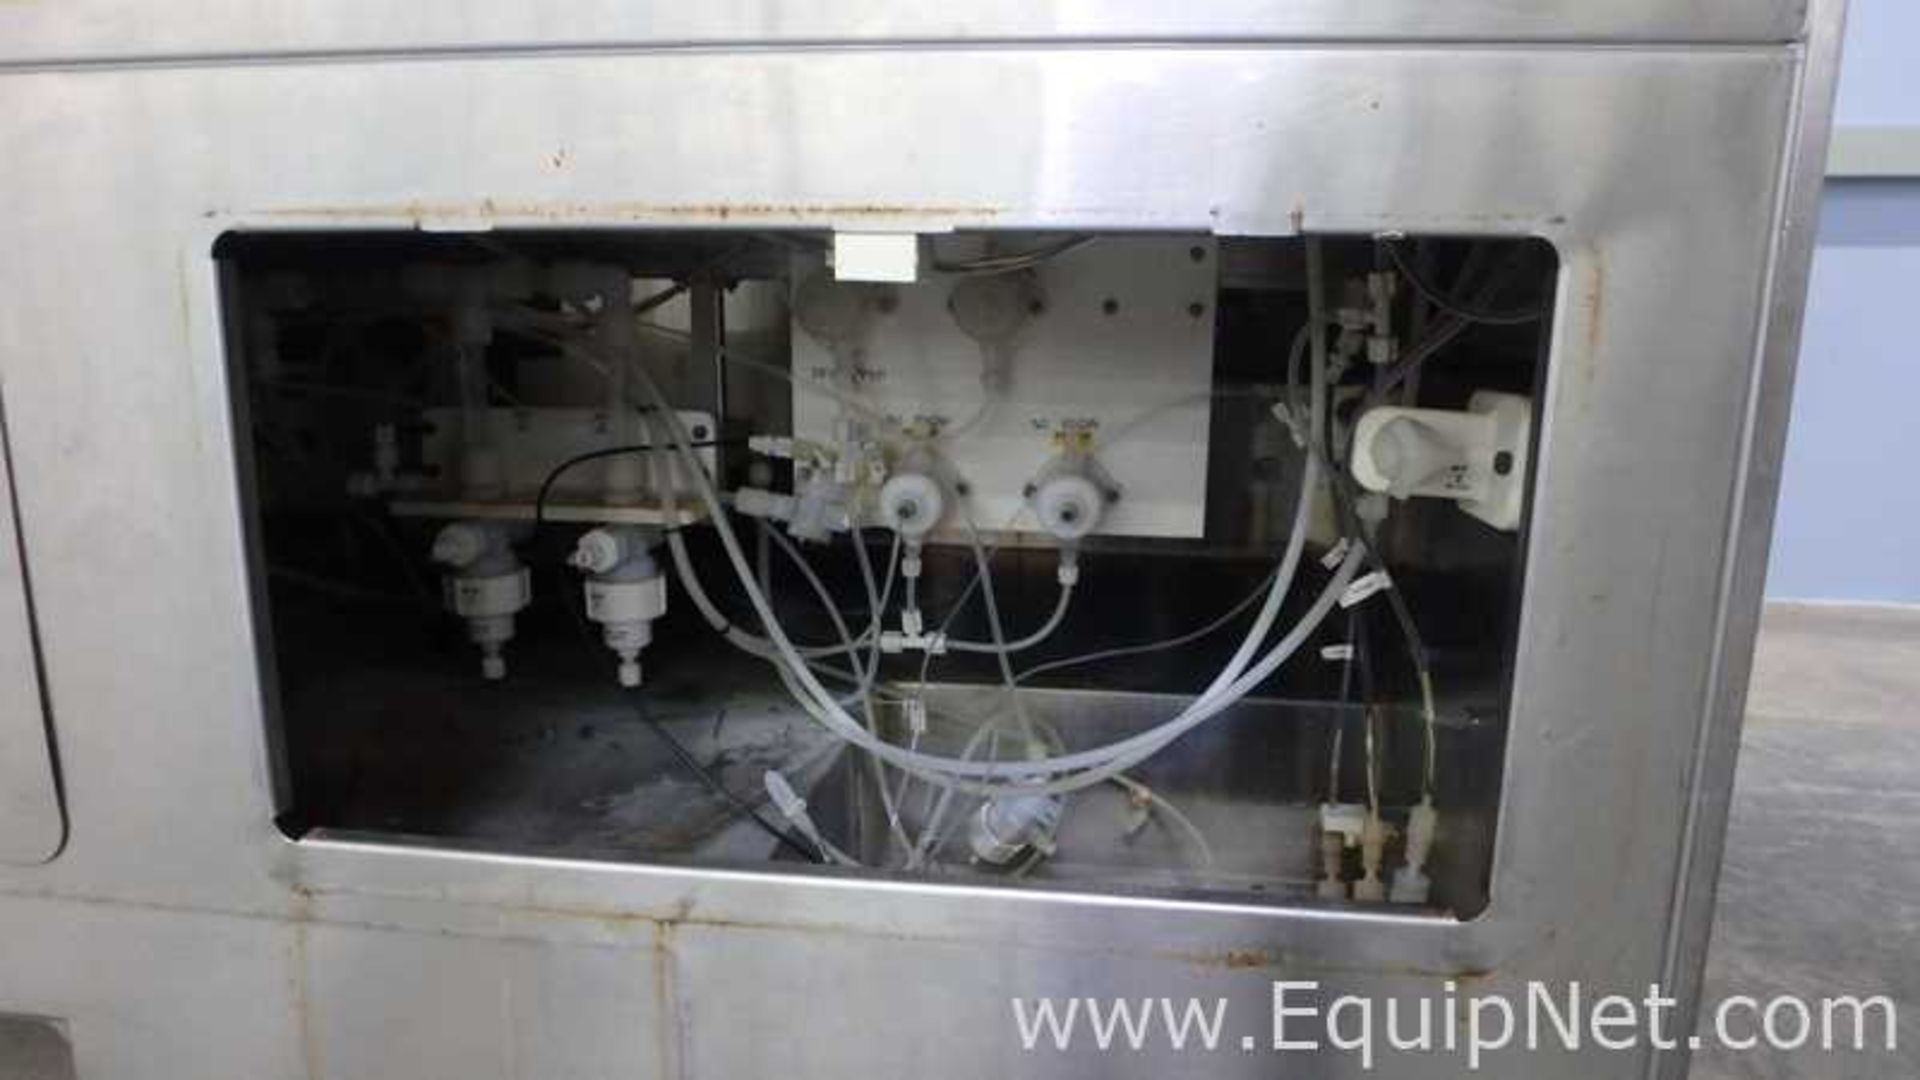 SPEC Semiconductor Process Equipment SBX5-36 Photoresist Developer System - Image 27 of 31